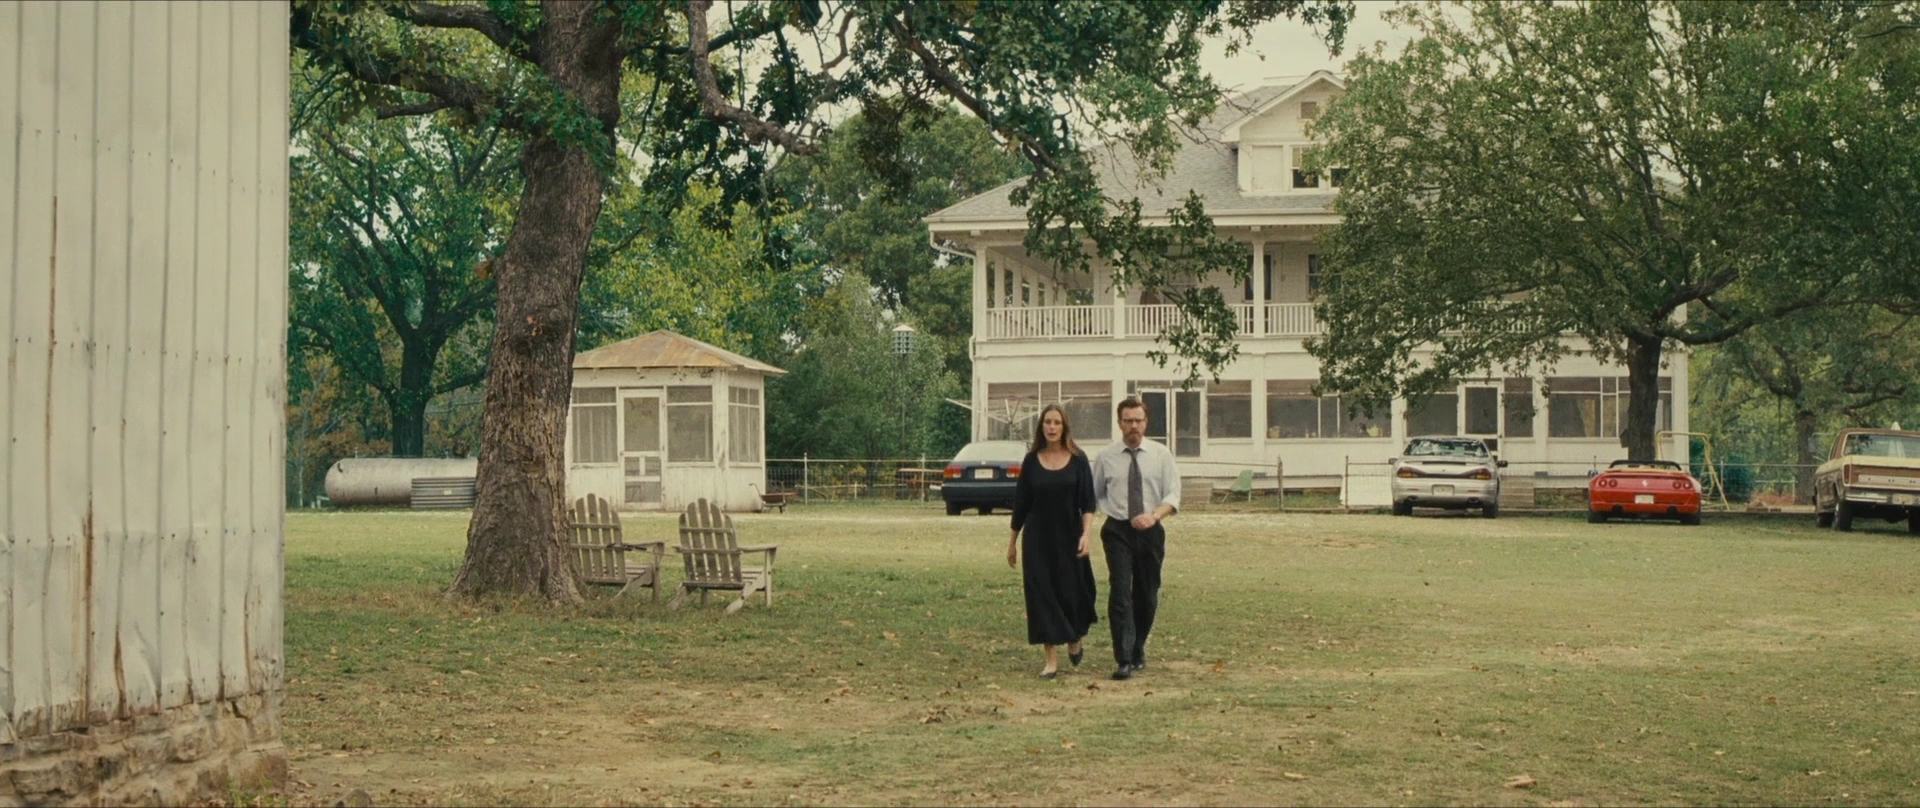 August-Osage-County-153.jpg